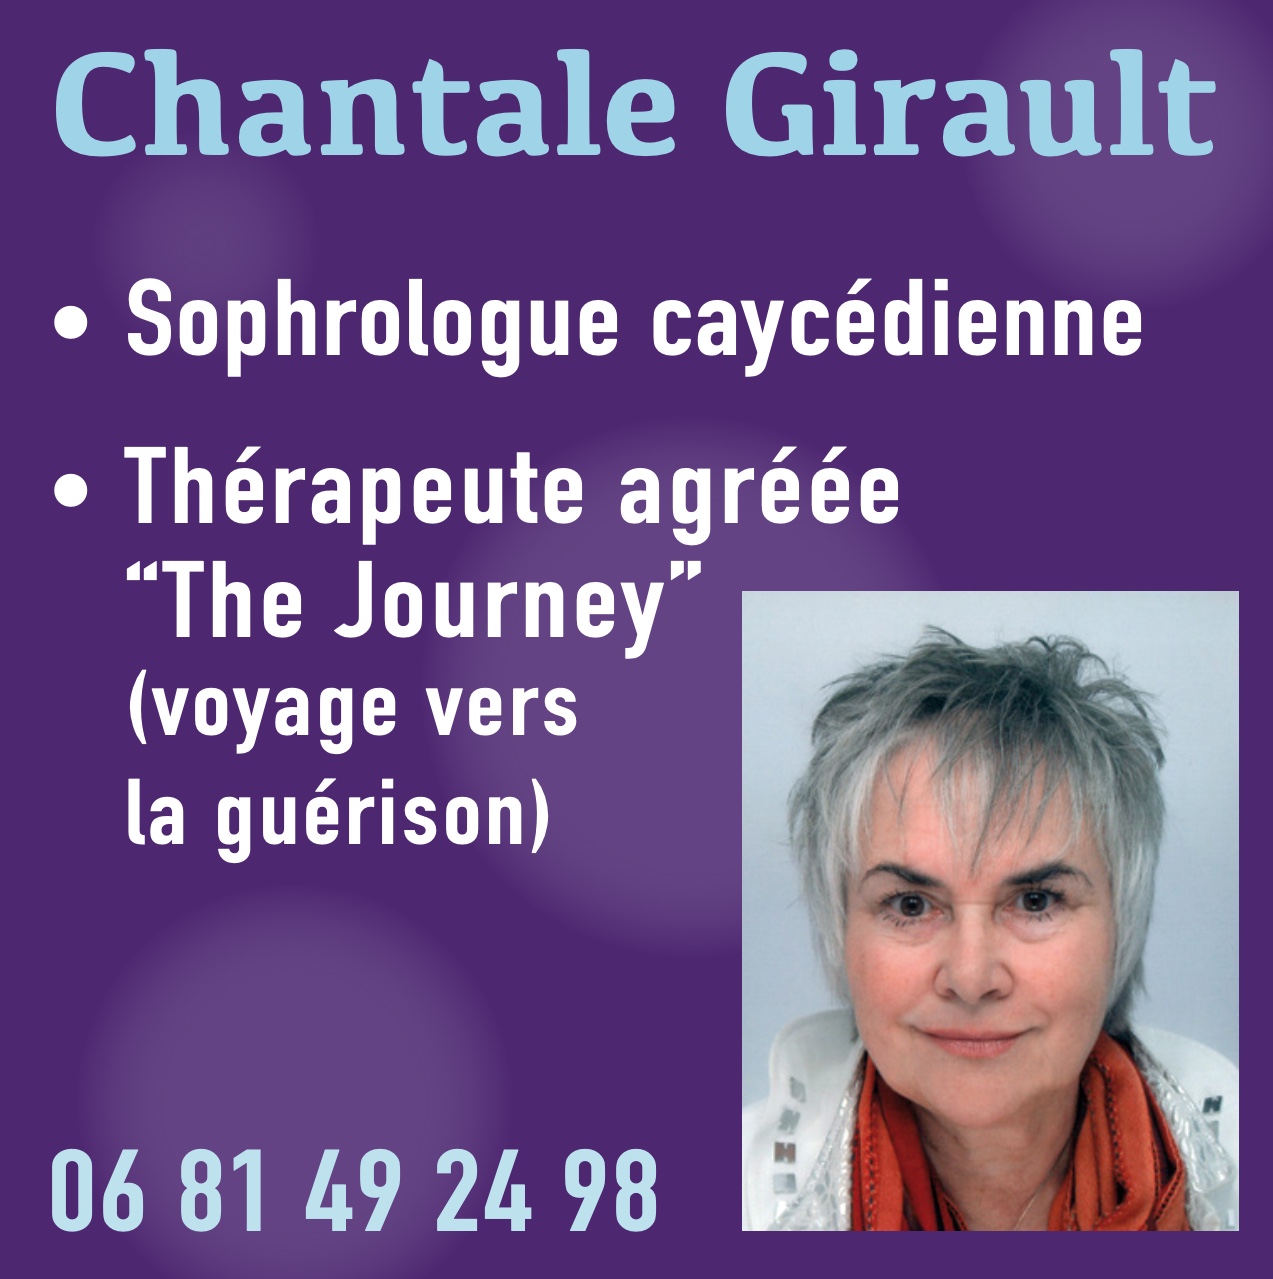 Comptoir Zaba atelier 3 – Chantale Girault Sophrologue caycedienne therapeute agree the journey